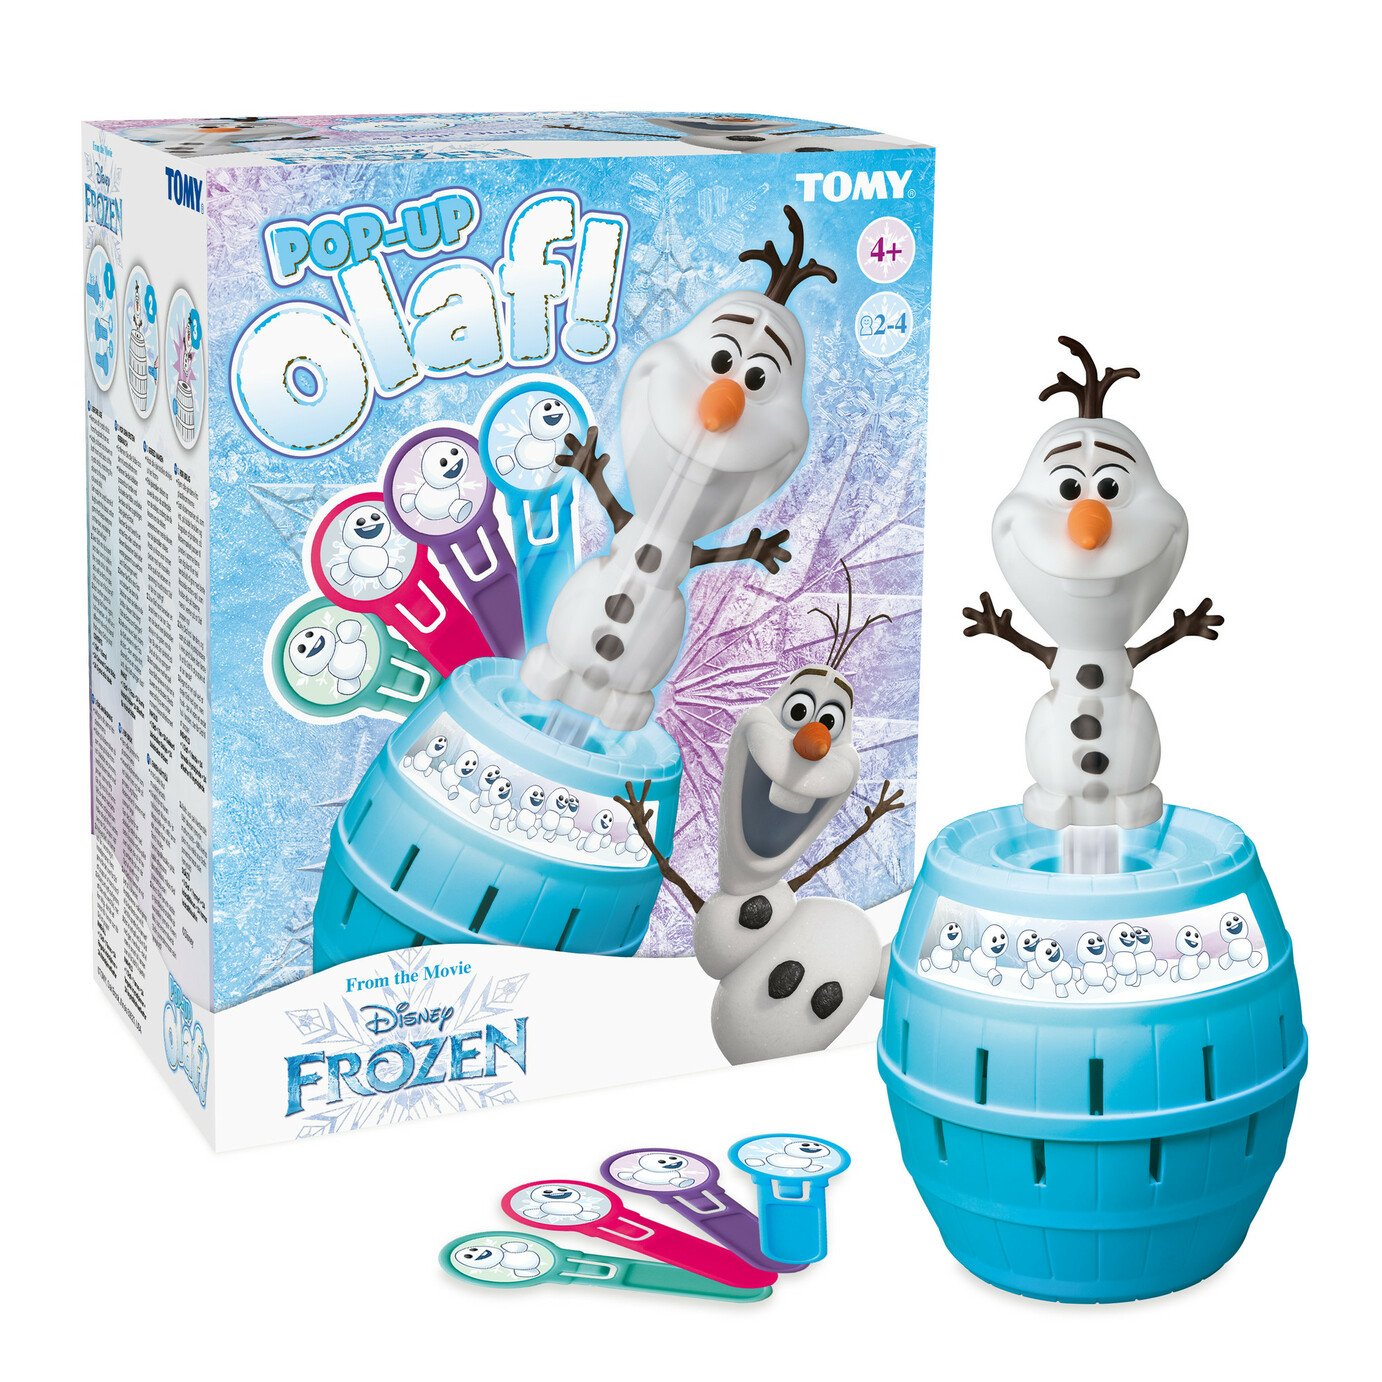 Disney Frozen 2 Pop Up Olaf Game Review